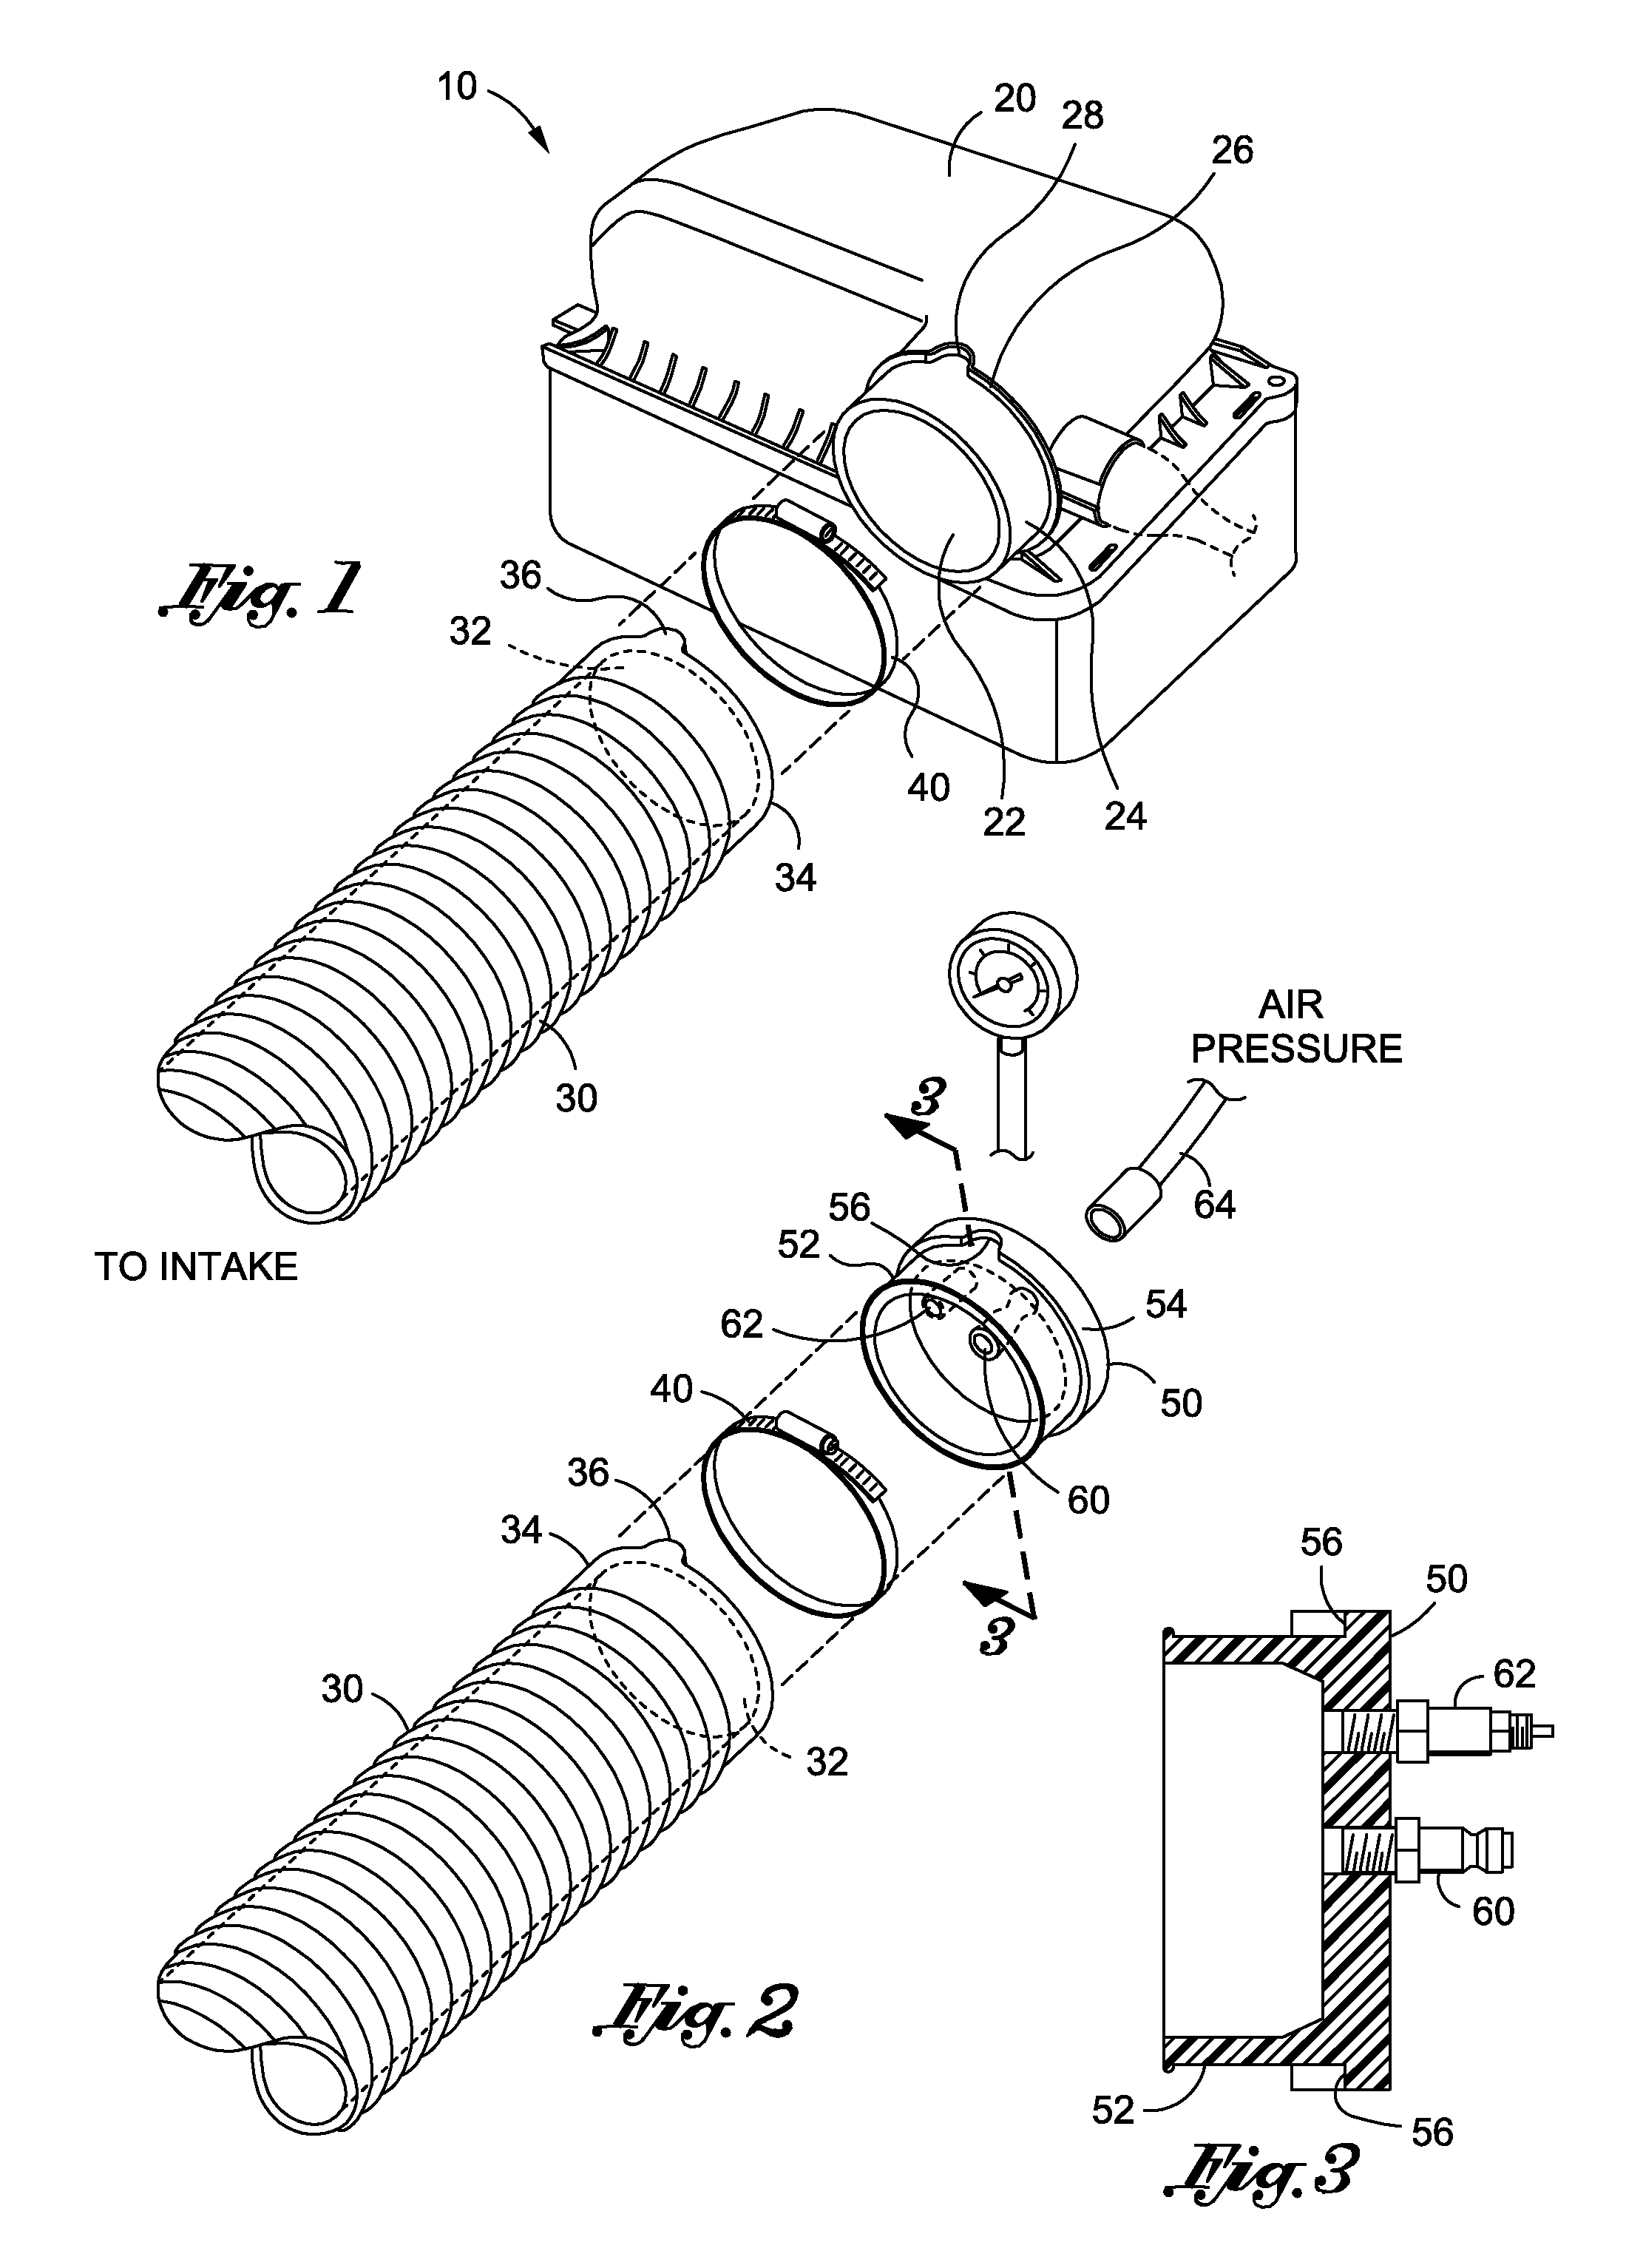 Leak detection system with secure sealing mechanism